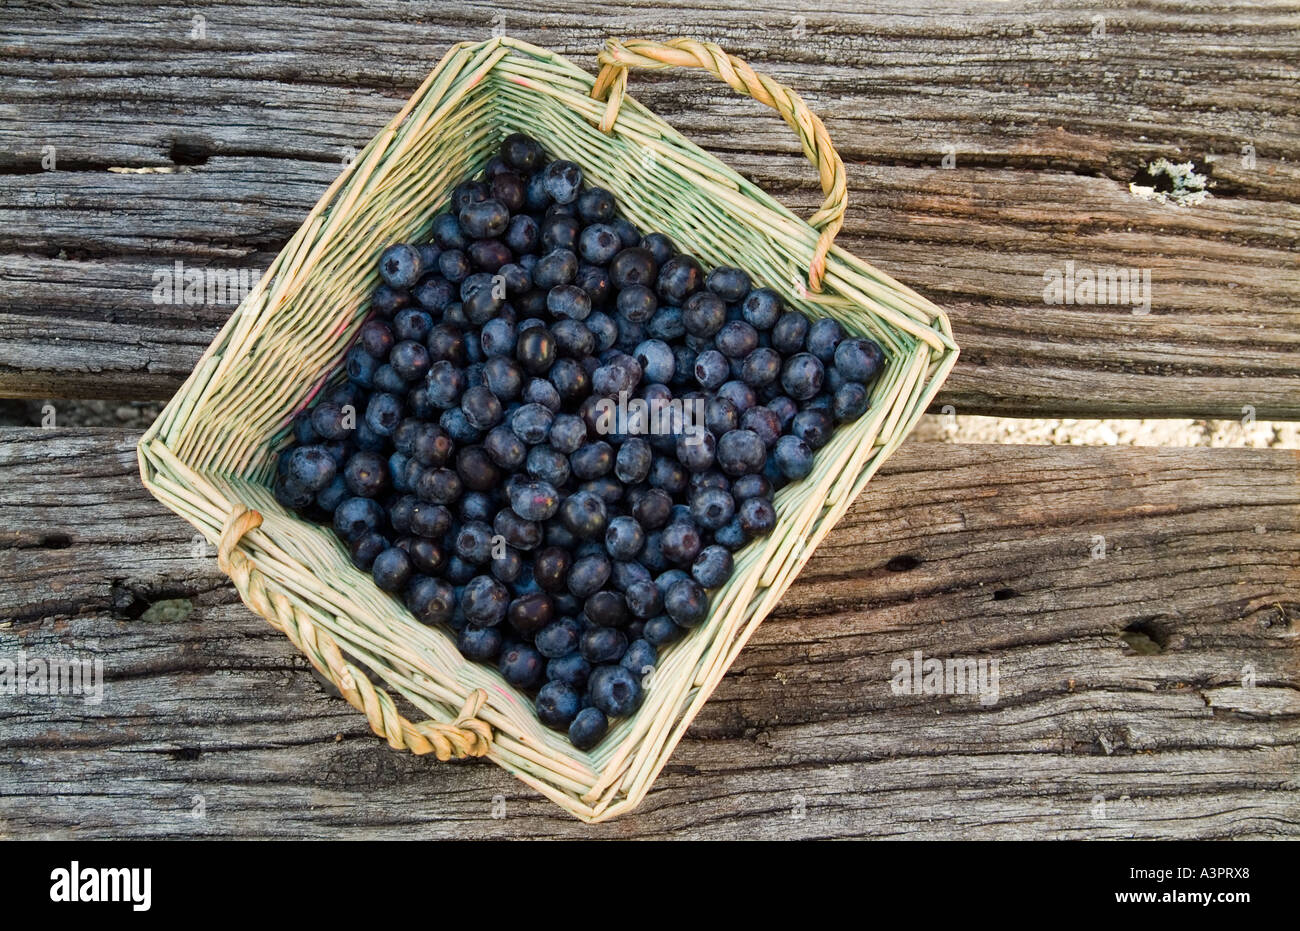 Basket of ripe blueberries on old garden bench Stock Photo - Alamy